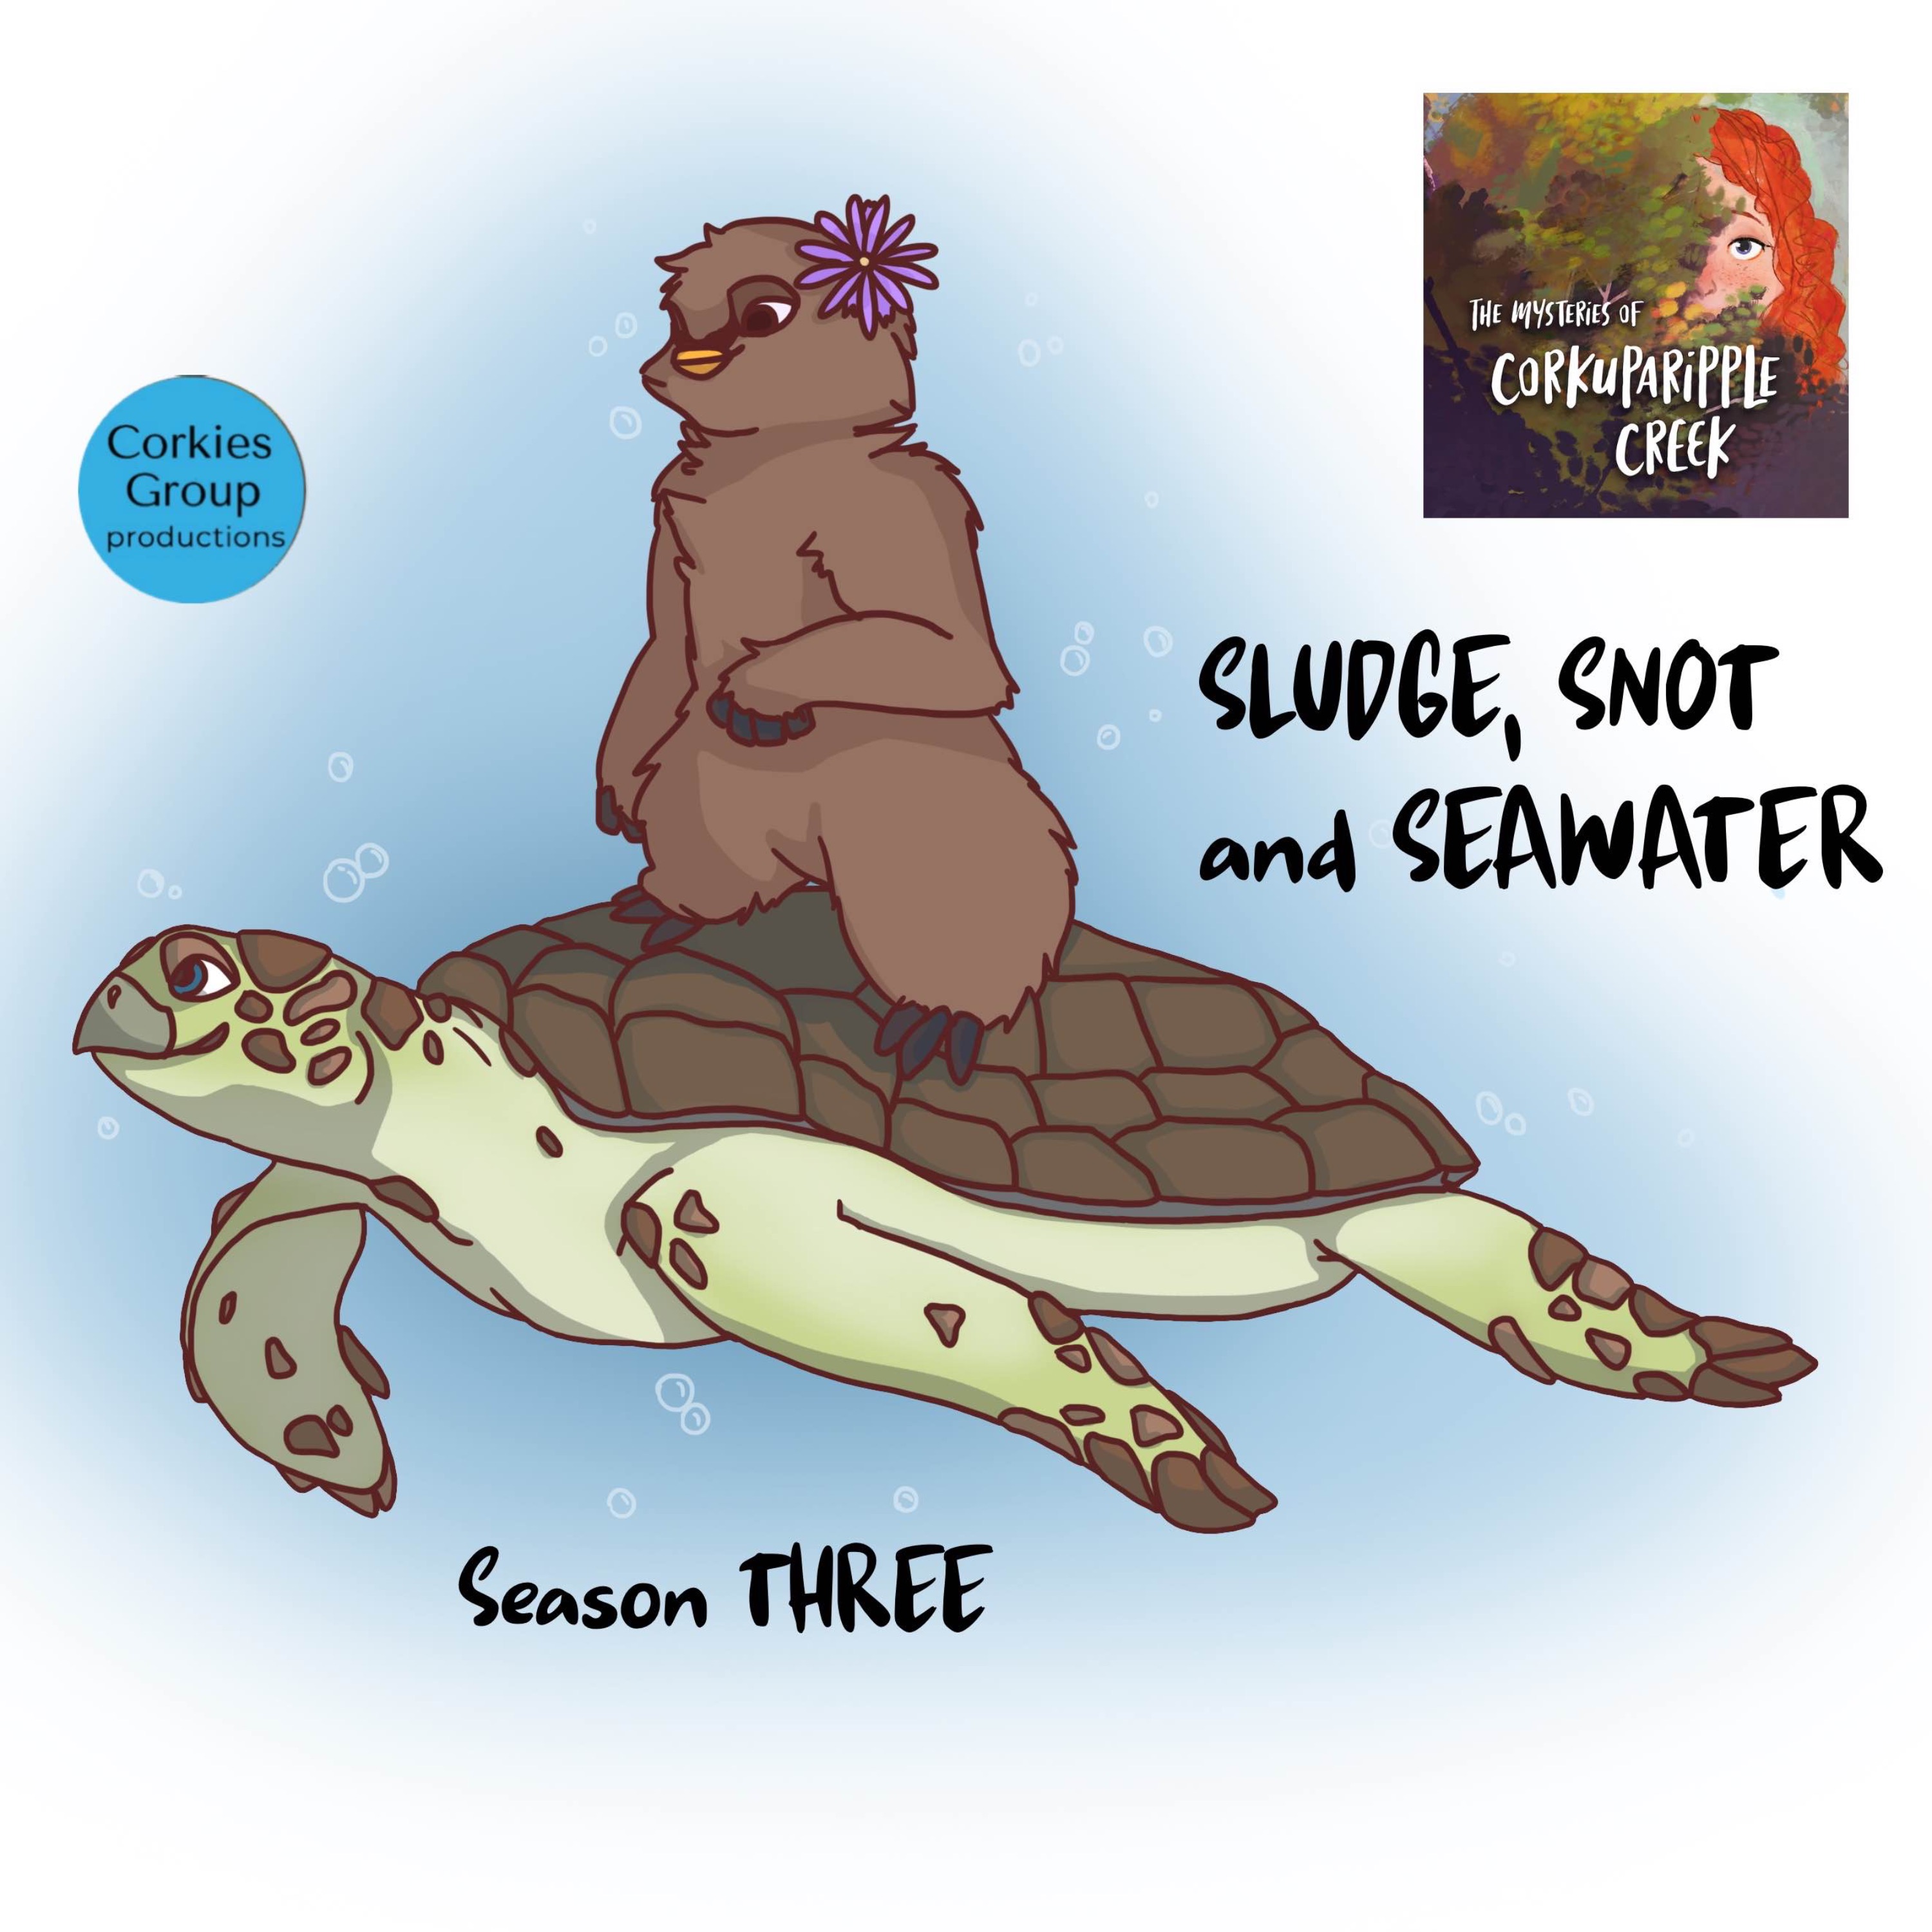 cover art for Season 3, Chapter 1, Sludge Snot and Seawater